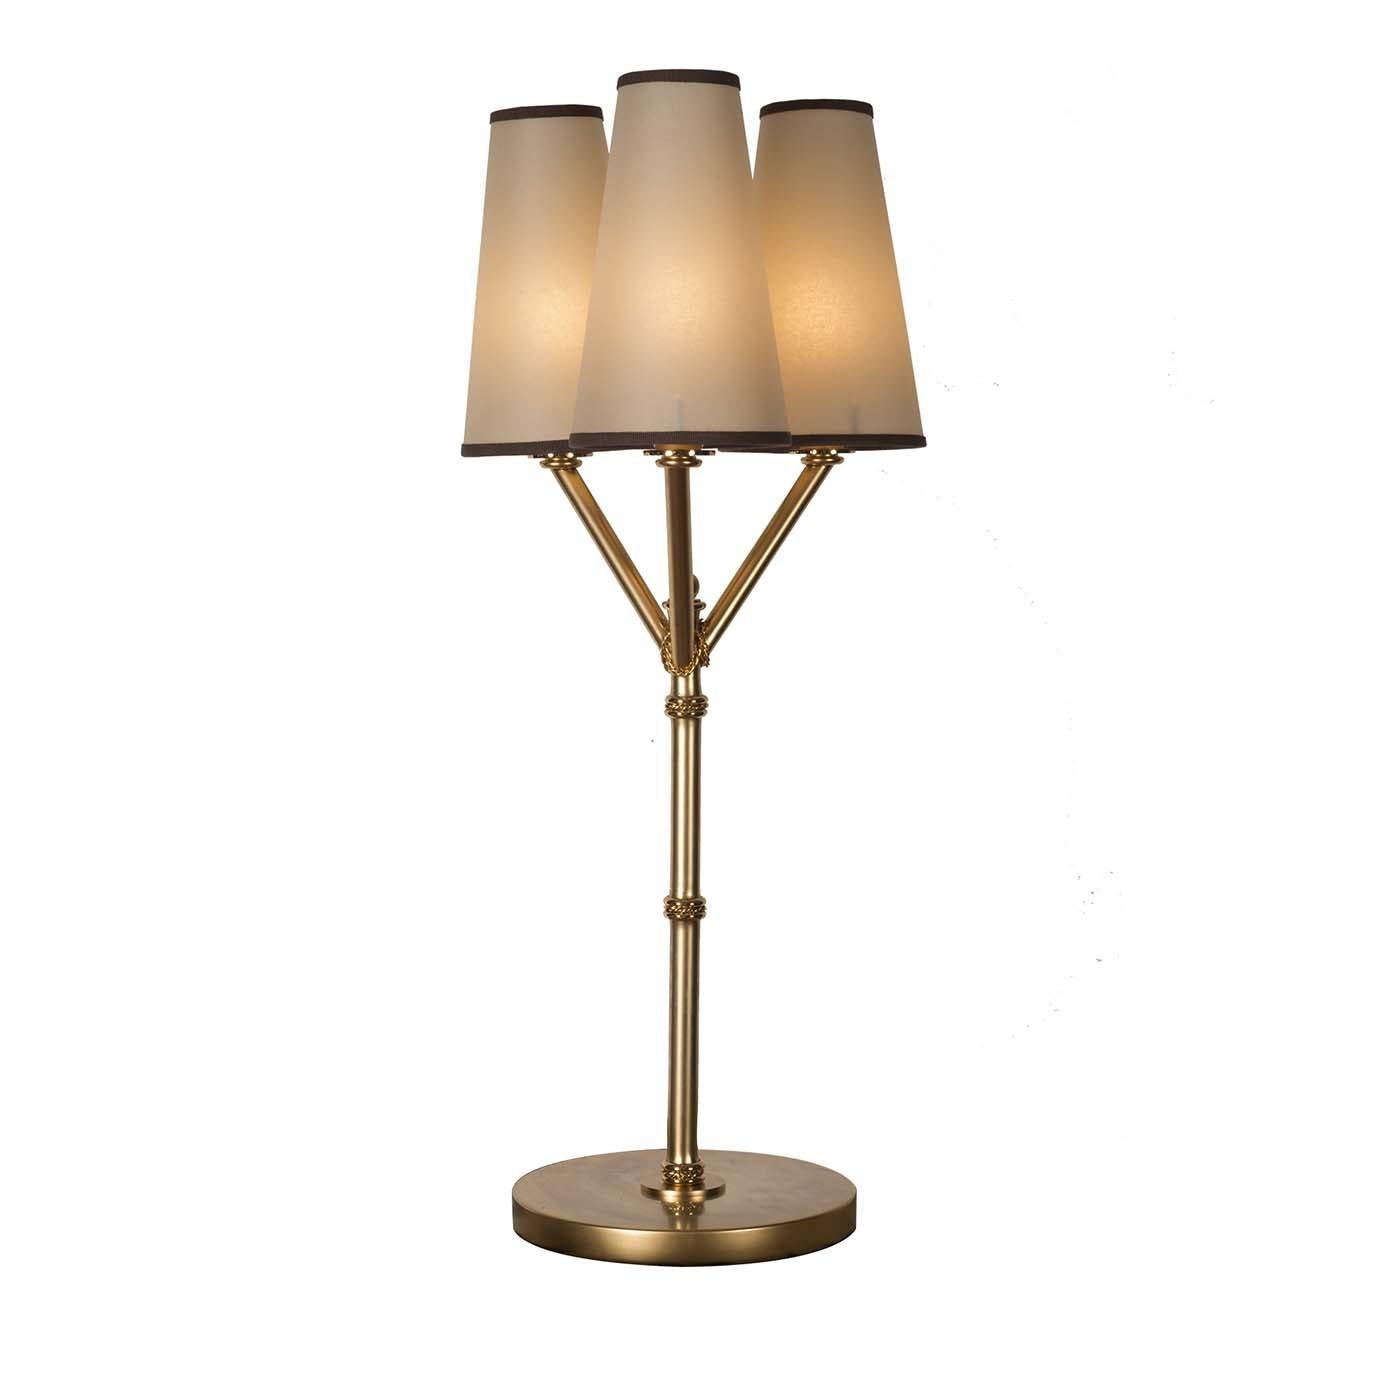 A piece of great visual effect, this striking table lamp is a superb statement piece for a modern and Classic living room or private study. Handcrafted of brass with a satin gold finish, the sleek silhouette boasts a tall, slender stem that branches